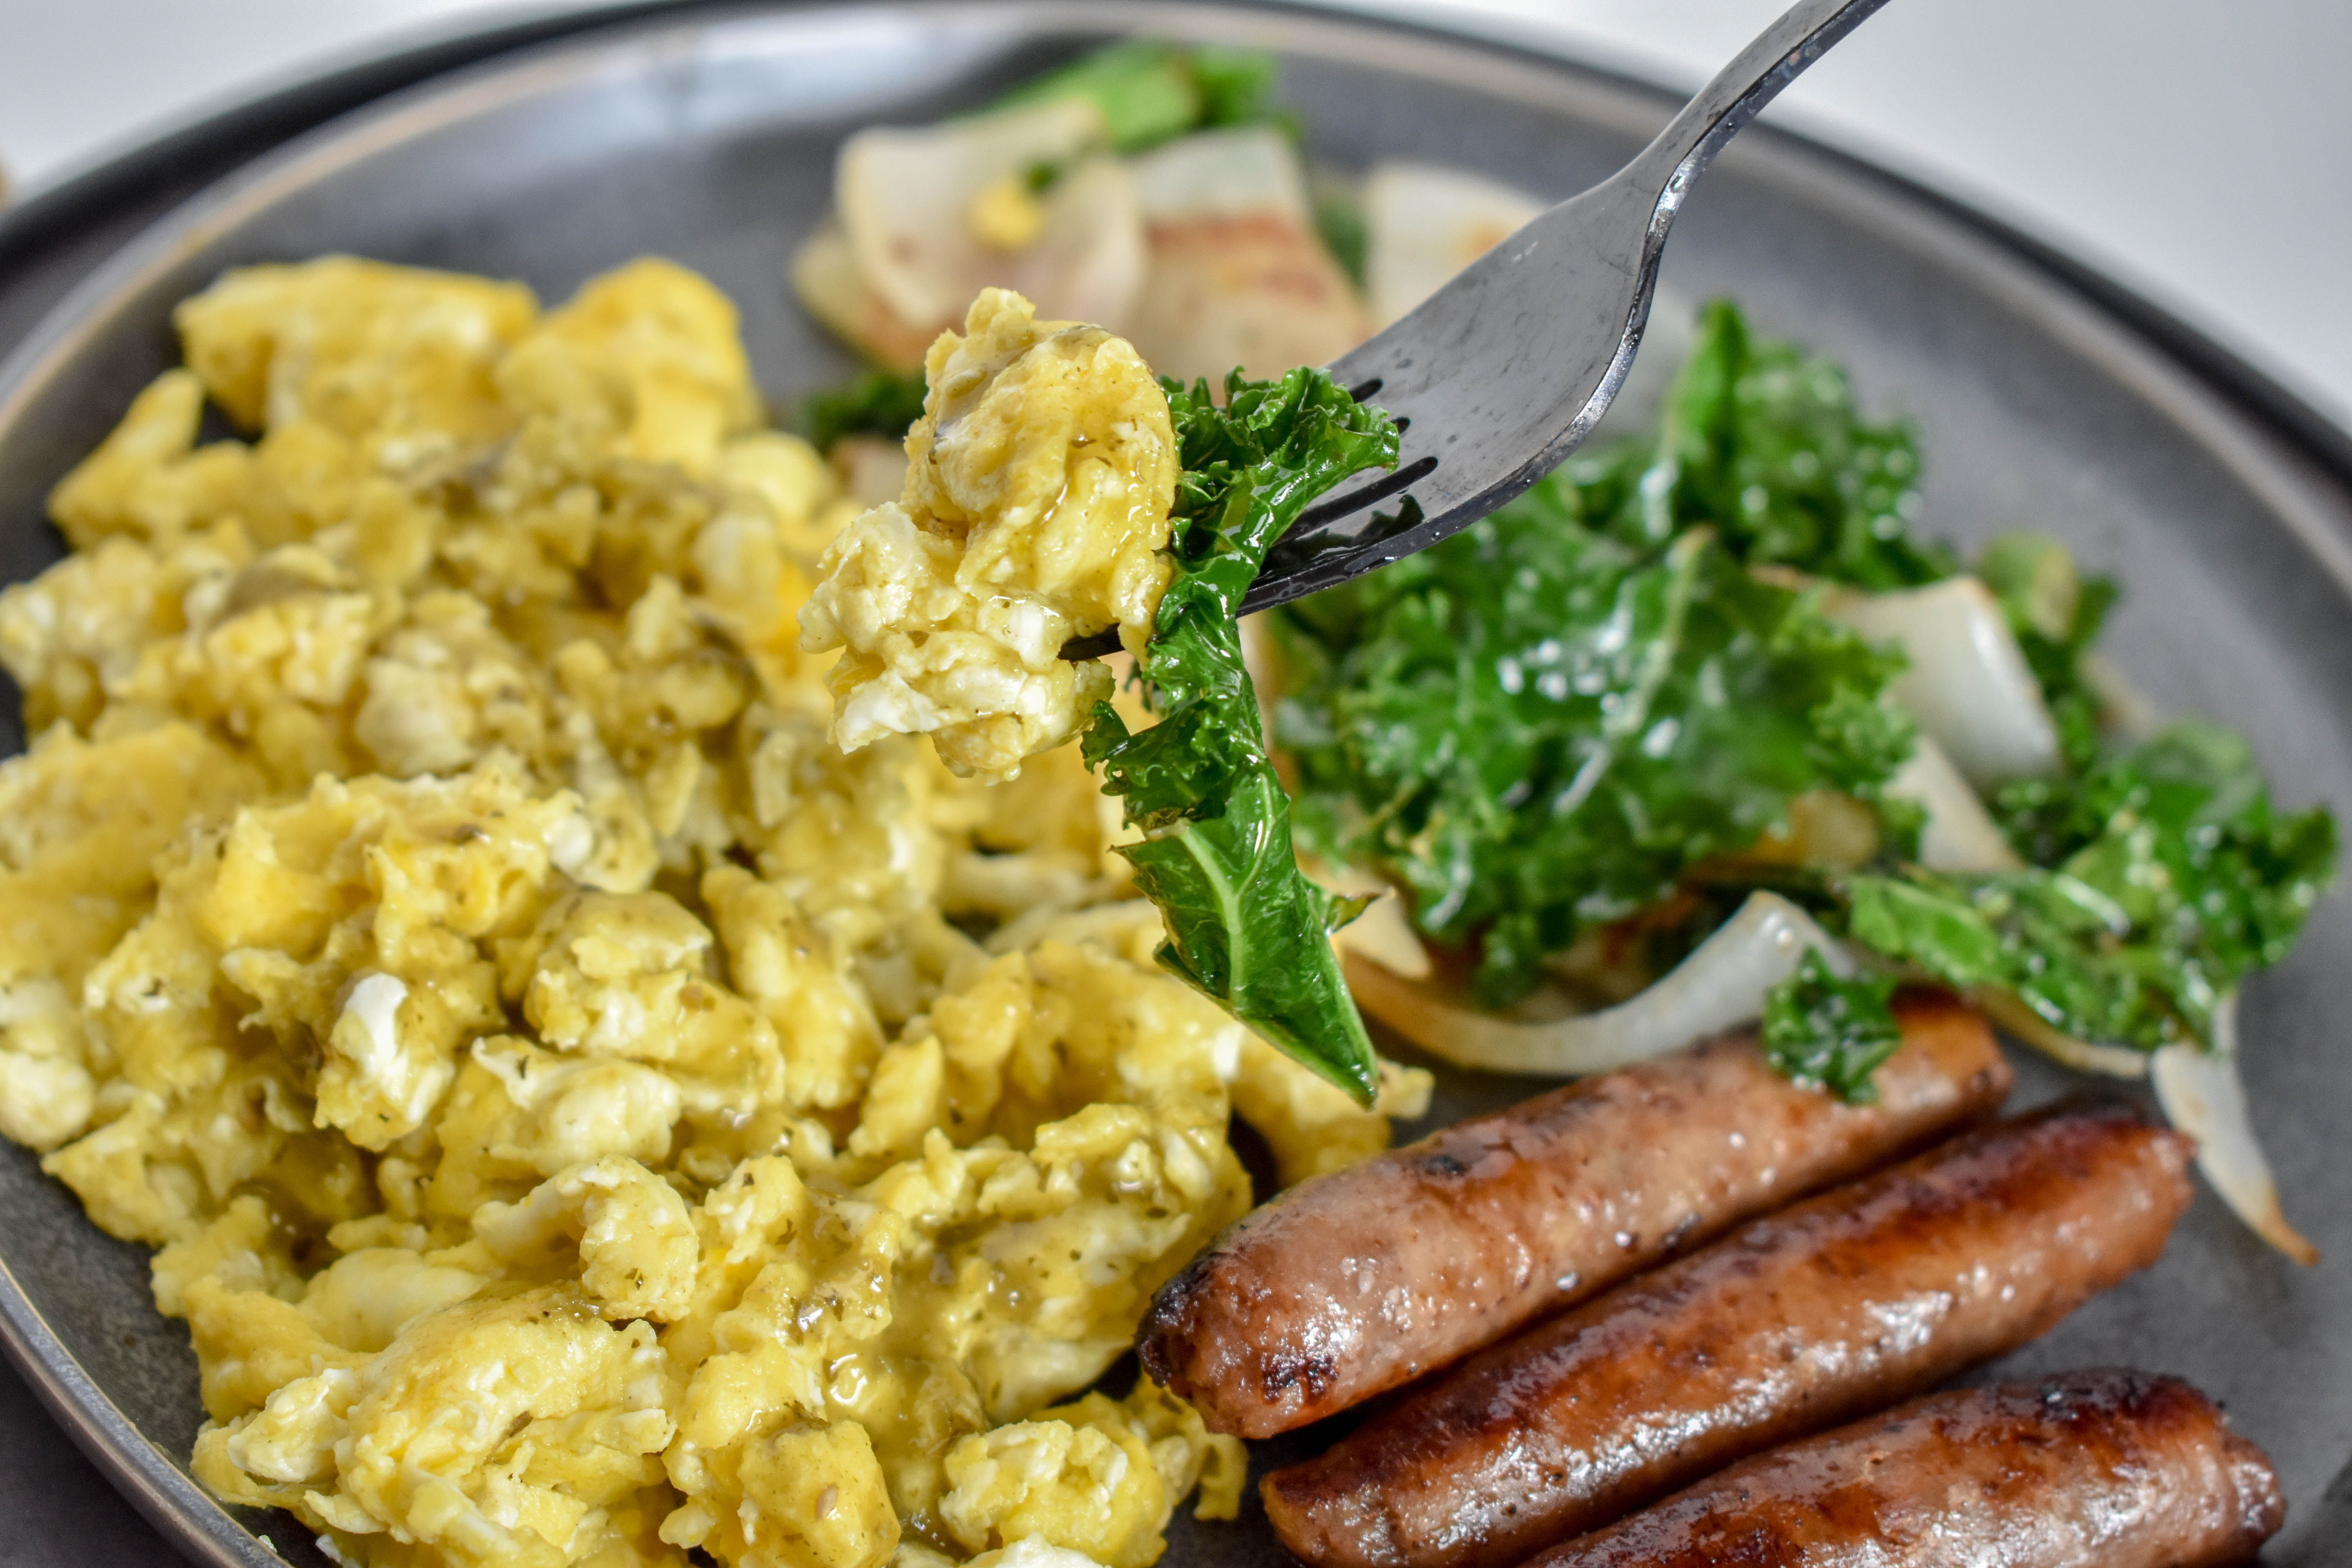 Clean Eating Breakfast with scrambled eggs, sausage links and sauteed kale and onions on a grey plate.